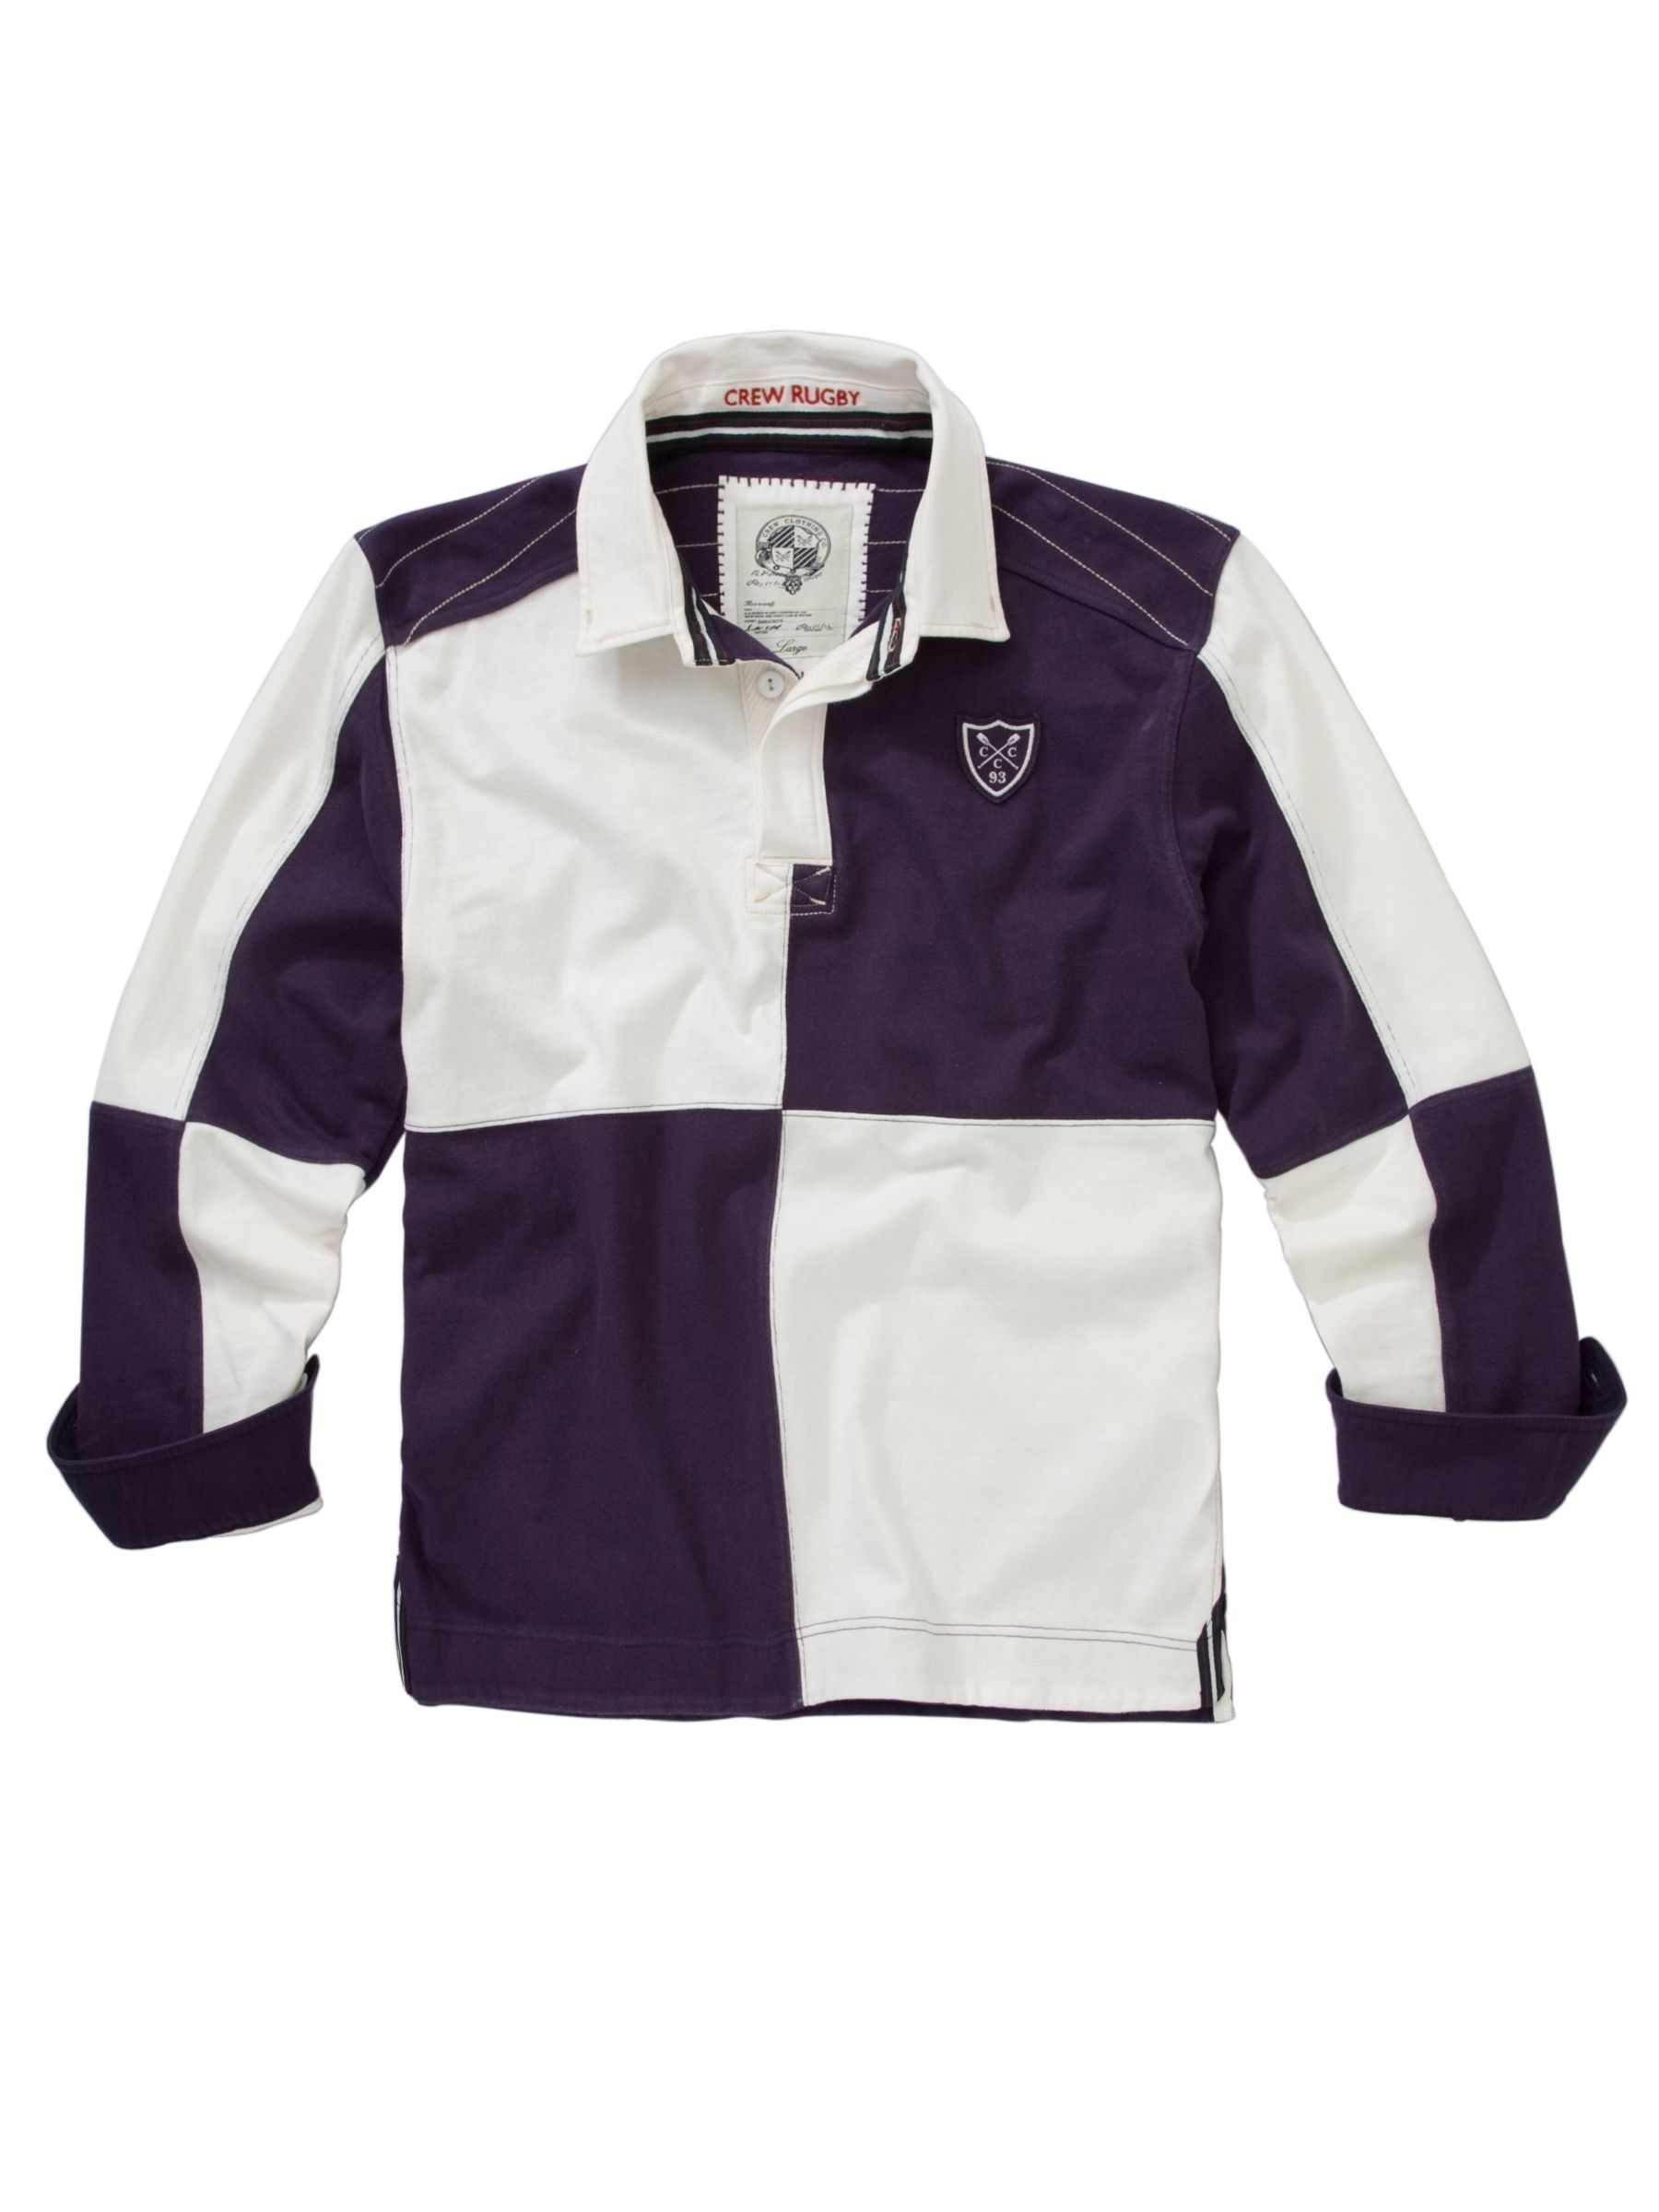 Harrison Rugby Shirt, White/Navy, L